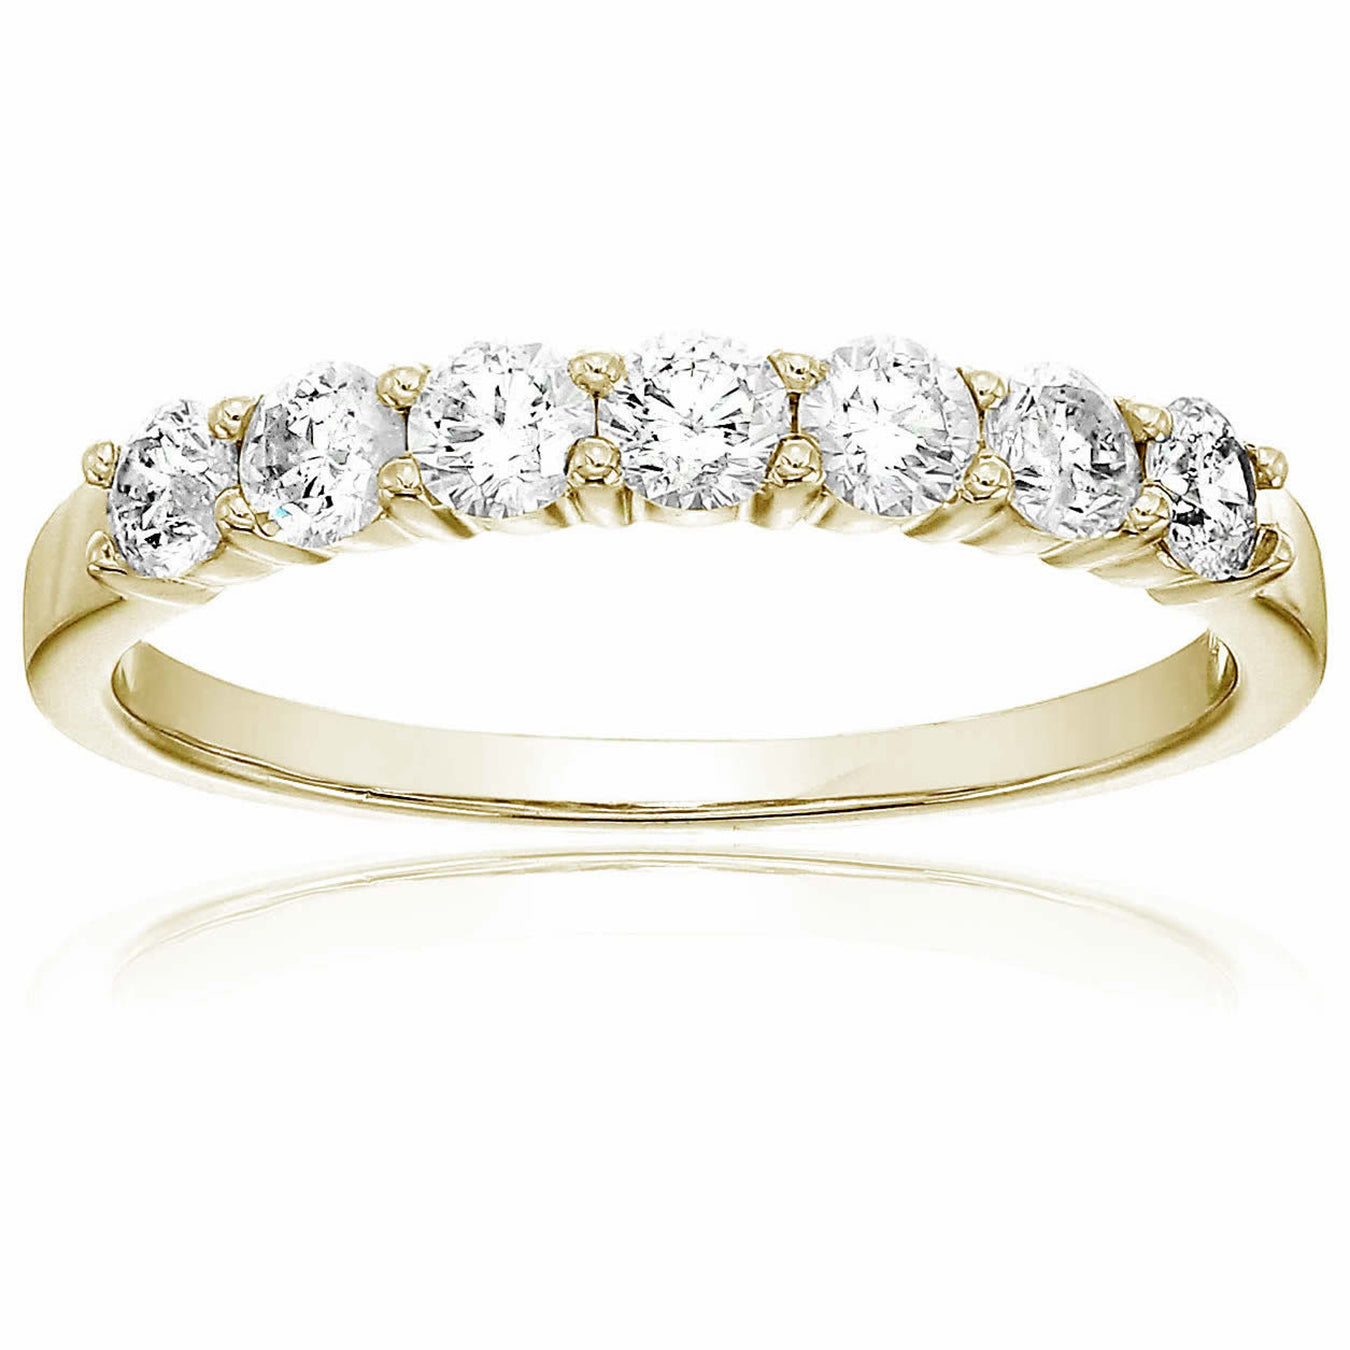 1/2 cttw Round Diamond Wedding Band for Women in 14K Yellow Gold 7 Stones Prong Set, Size 4-10